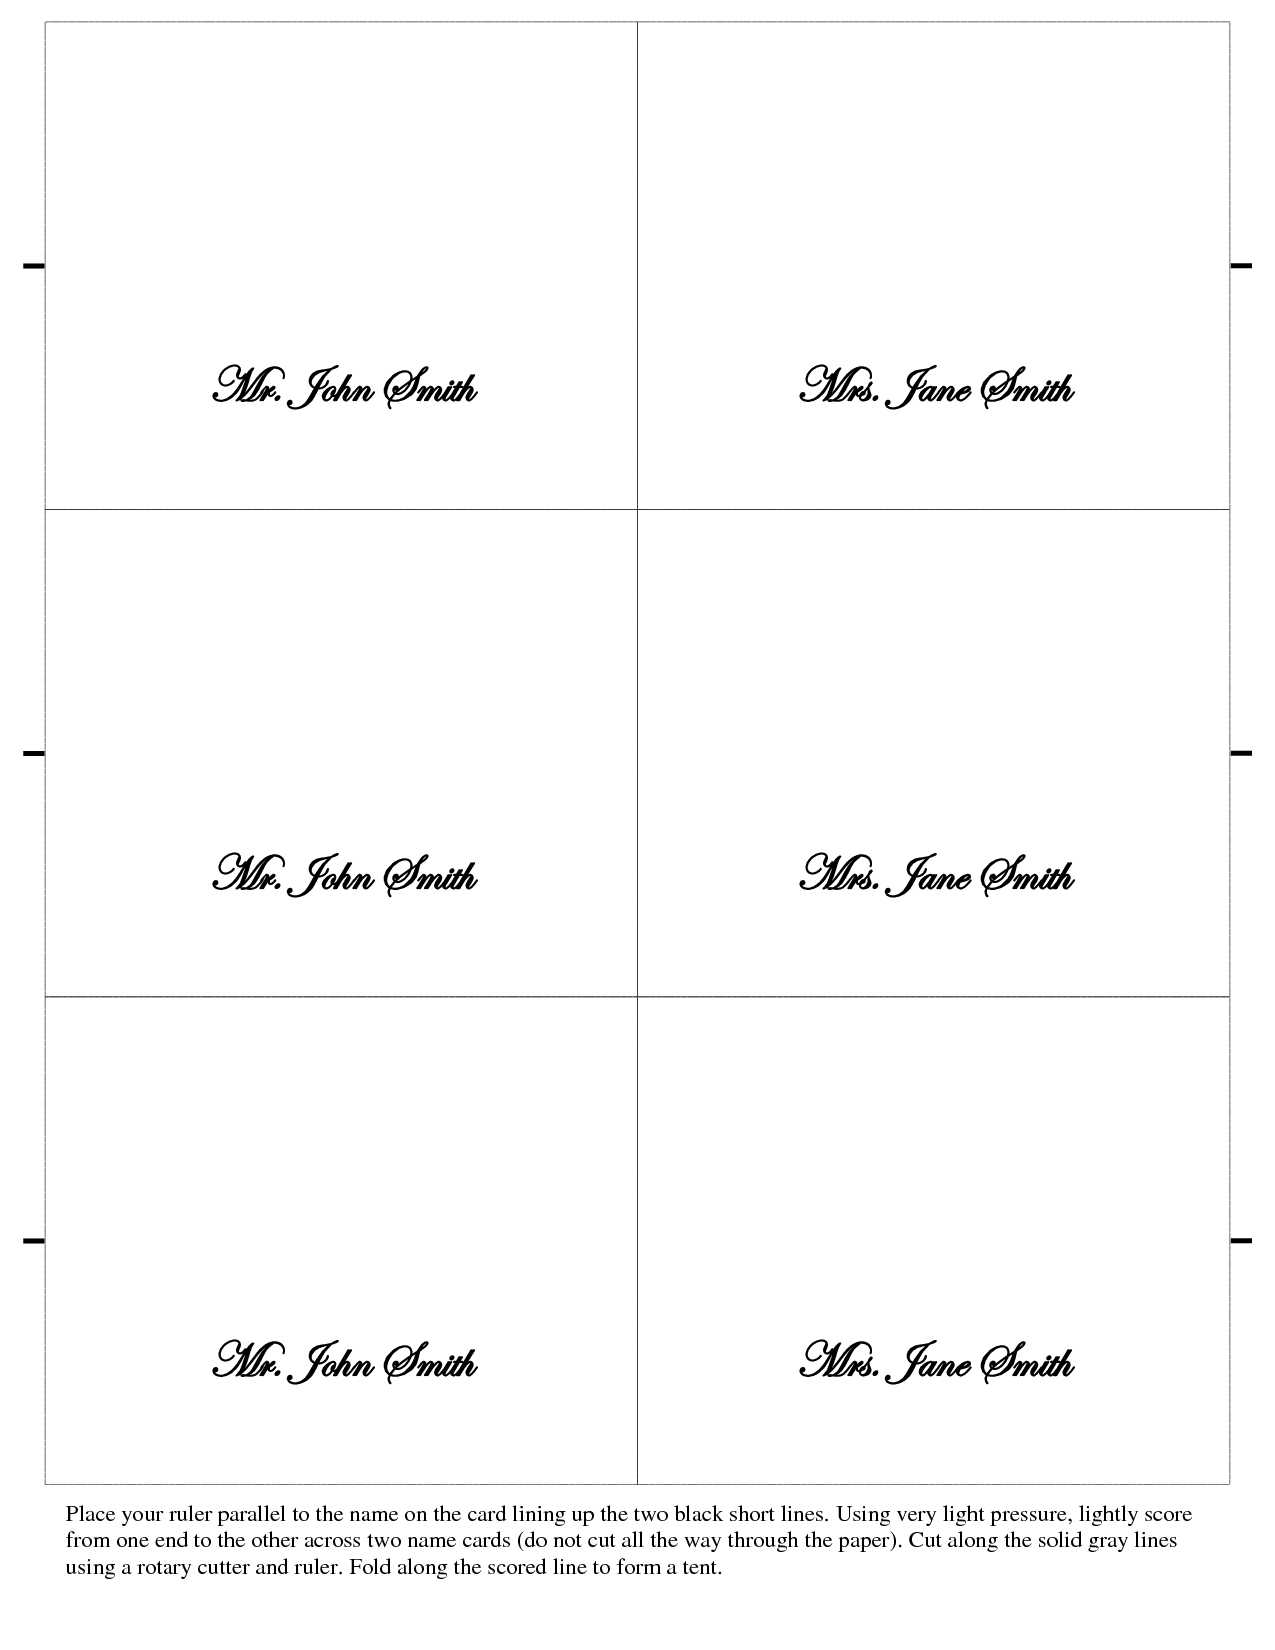 Free Place Card Templates 6 Per Page - Atlantaauctionco Inside Place Card Template Free 6 Per Page